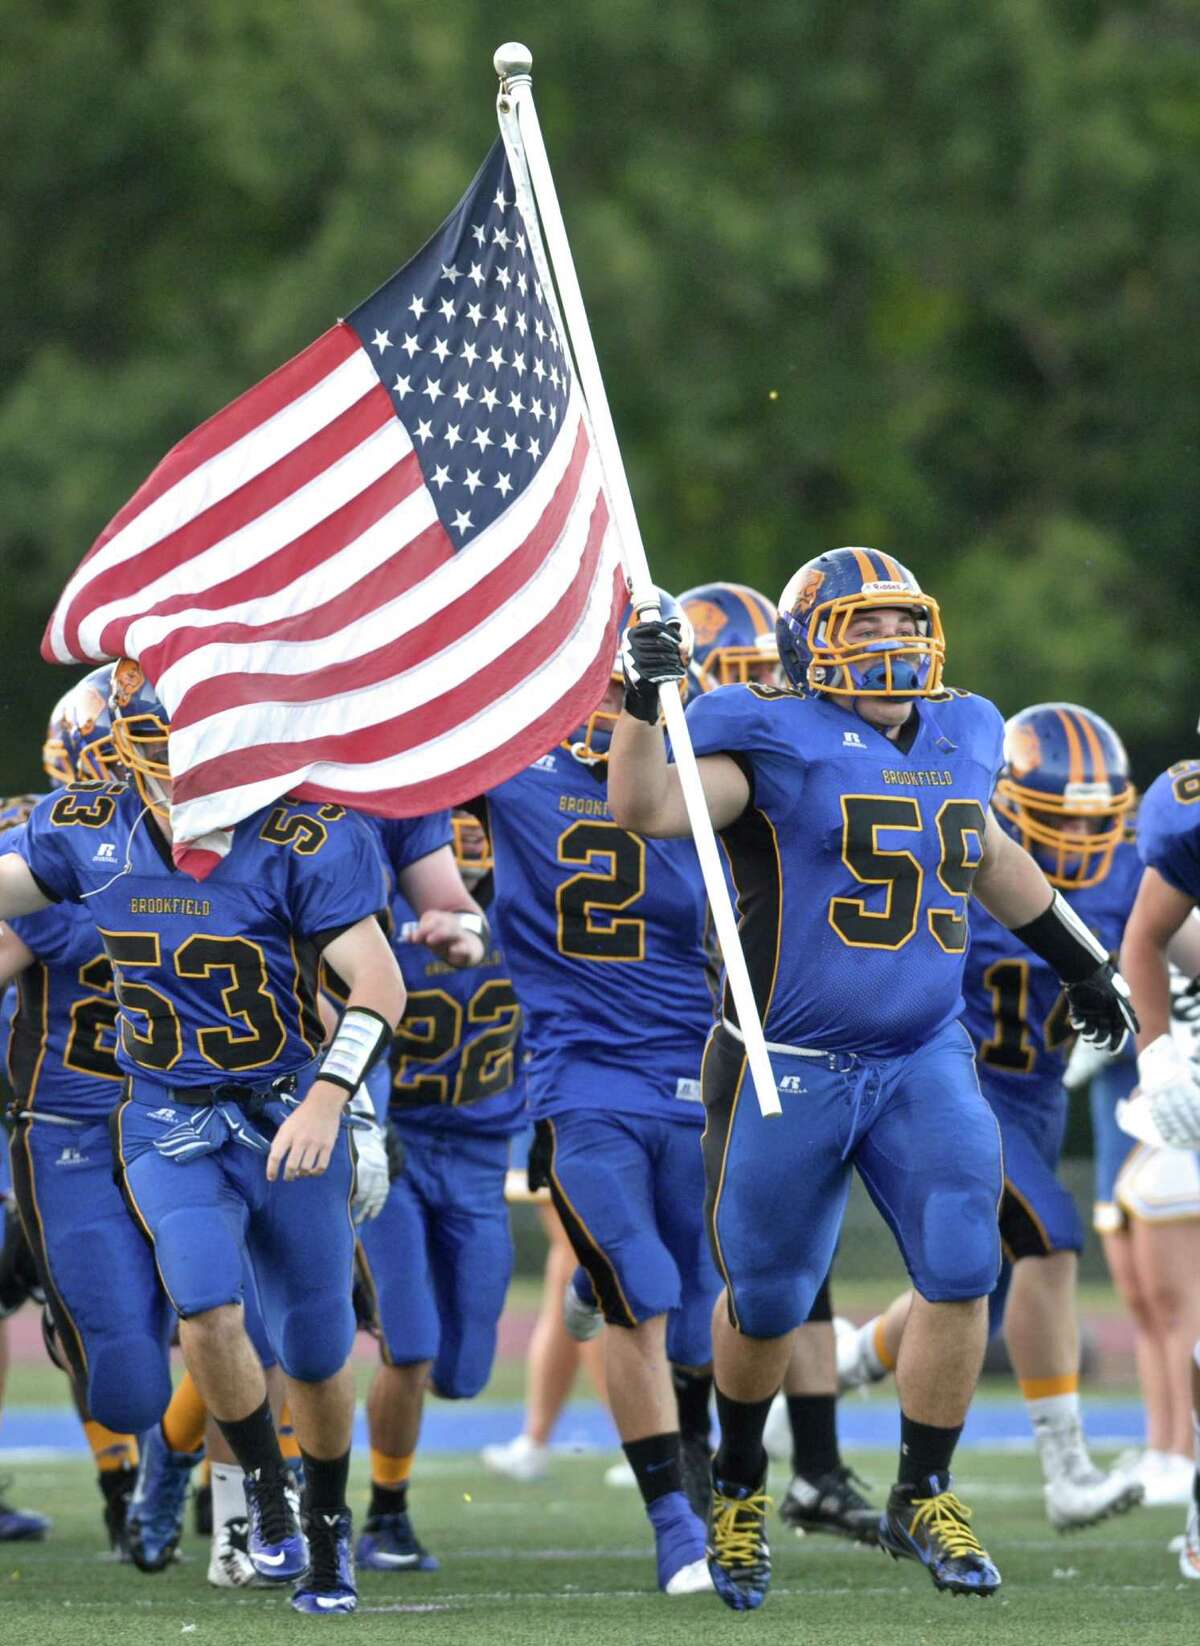 Photographs from football game between New Fairfield and Brookfield high schools on Friday night, September 11, 2015, at Brookfield High School, Brookfield, Conn.